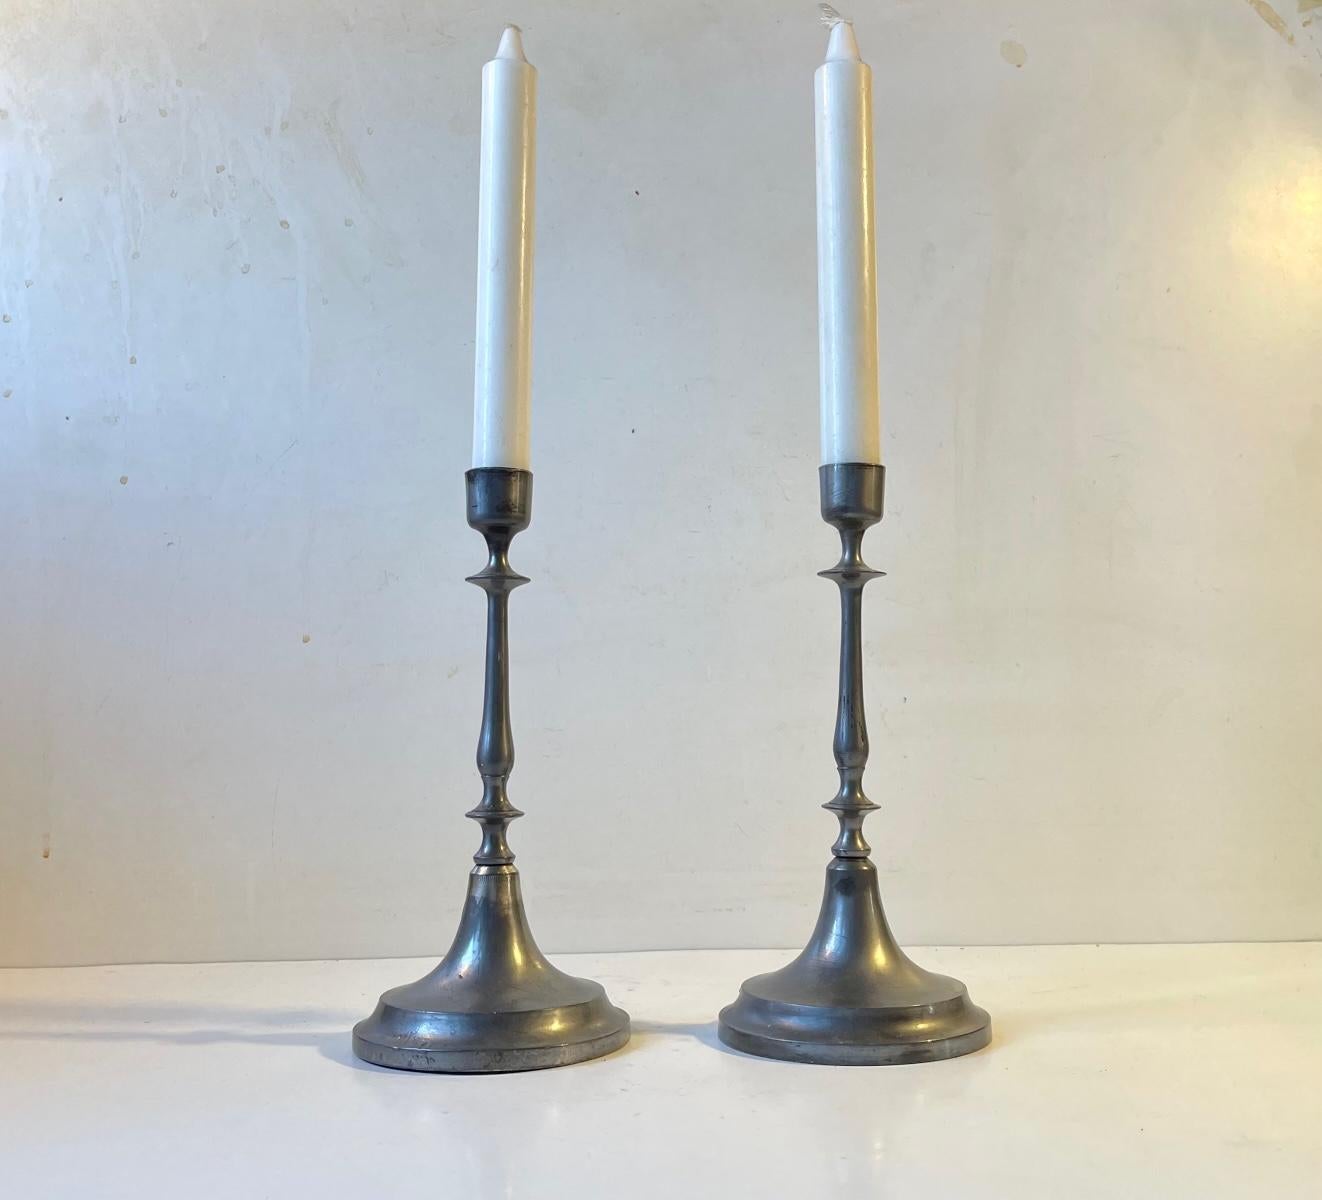 A pair of plain Scandinavian candlesticks in pewter. Very thin delicate stock. Made in Sweden or Denmark circa 1860. Please notice the patina. They have not been polished recently. Please read the condition report as well. They can be fitted with